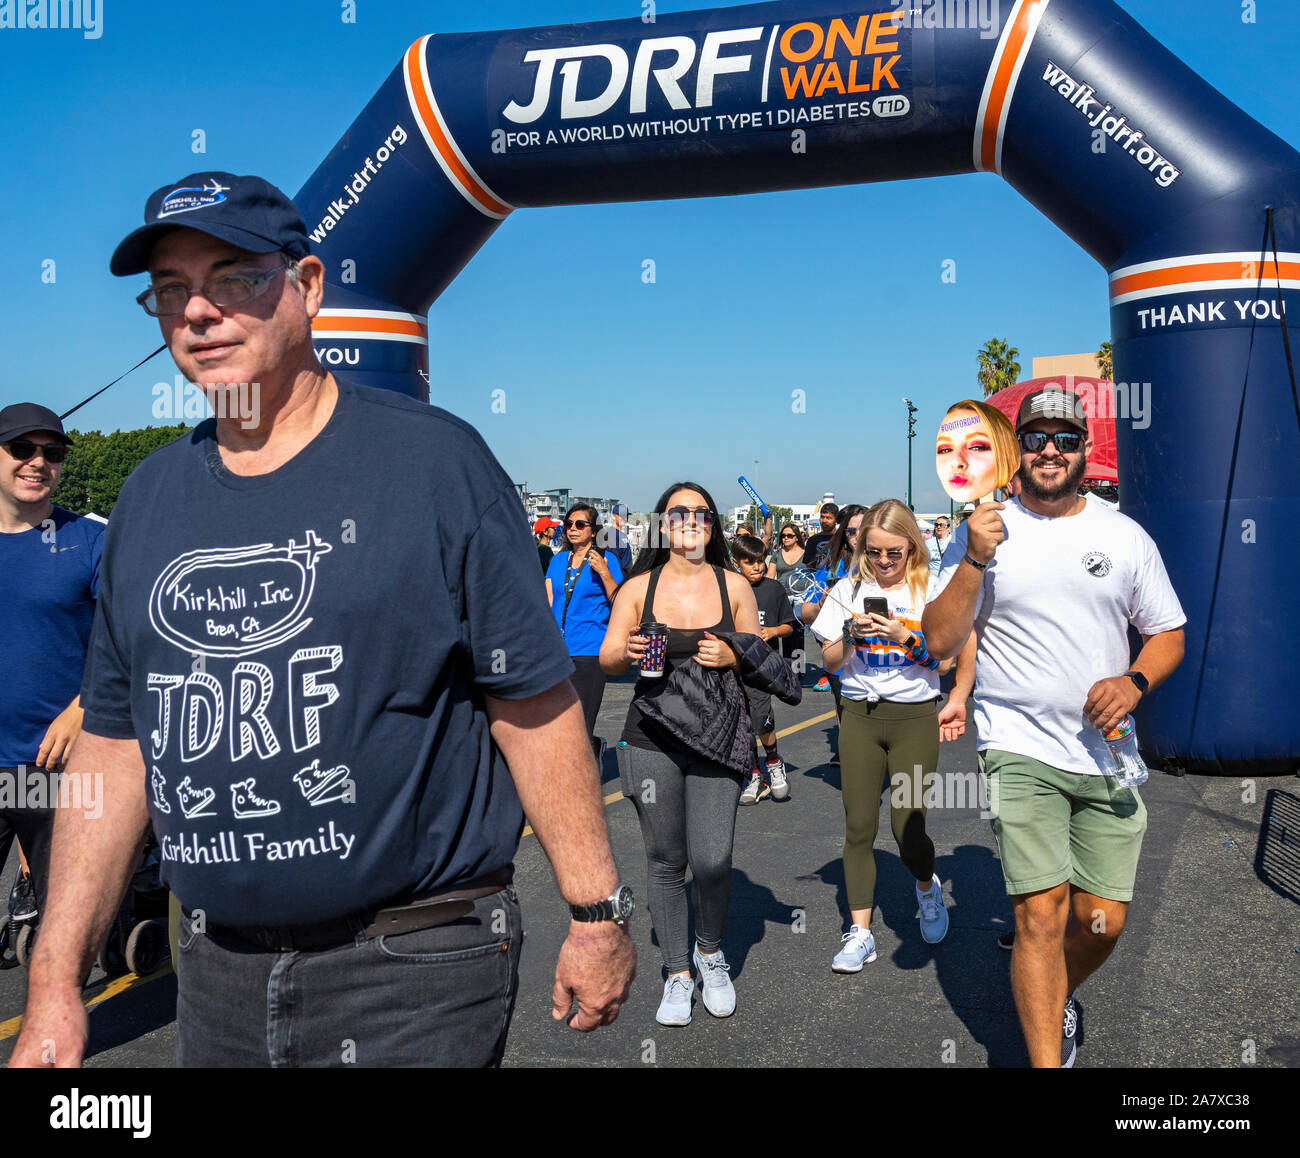 Anaheim, CA / USA - Nov 3, 2019: A group of people of mixed ages and ethnicity cross the finish line at the 2019 JDRF One Walk at Angel Stadium. Stock Photo